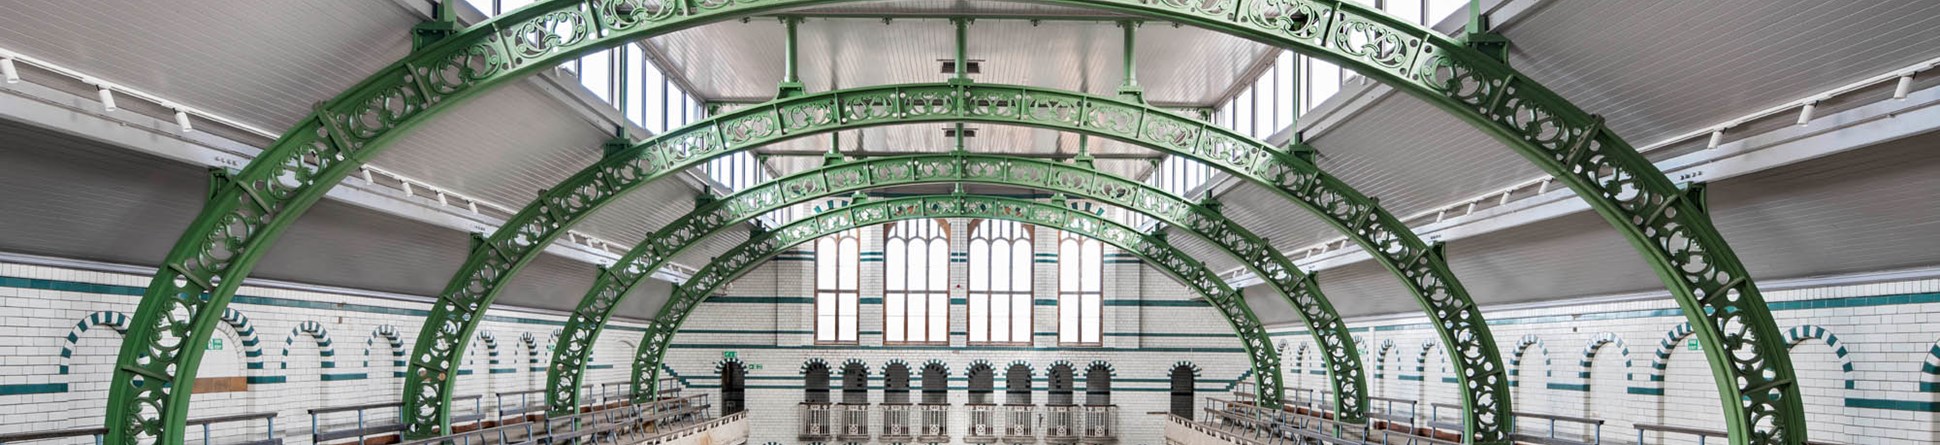 Ornate iron structure inside the Gala pool